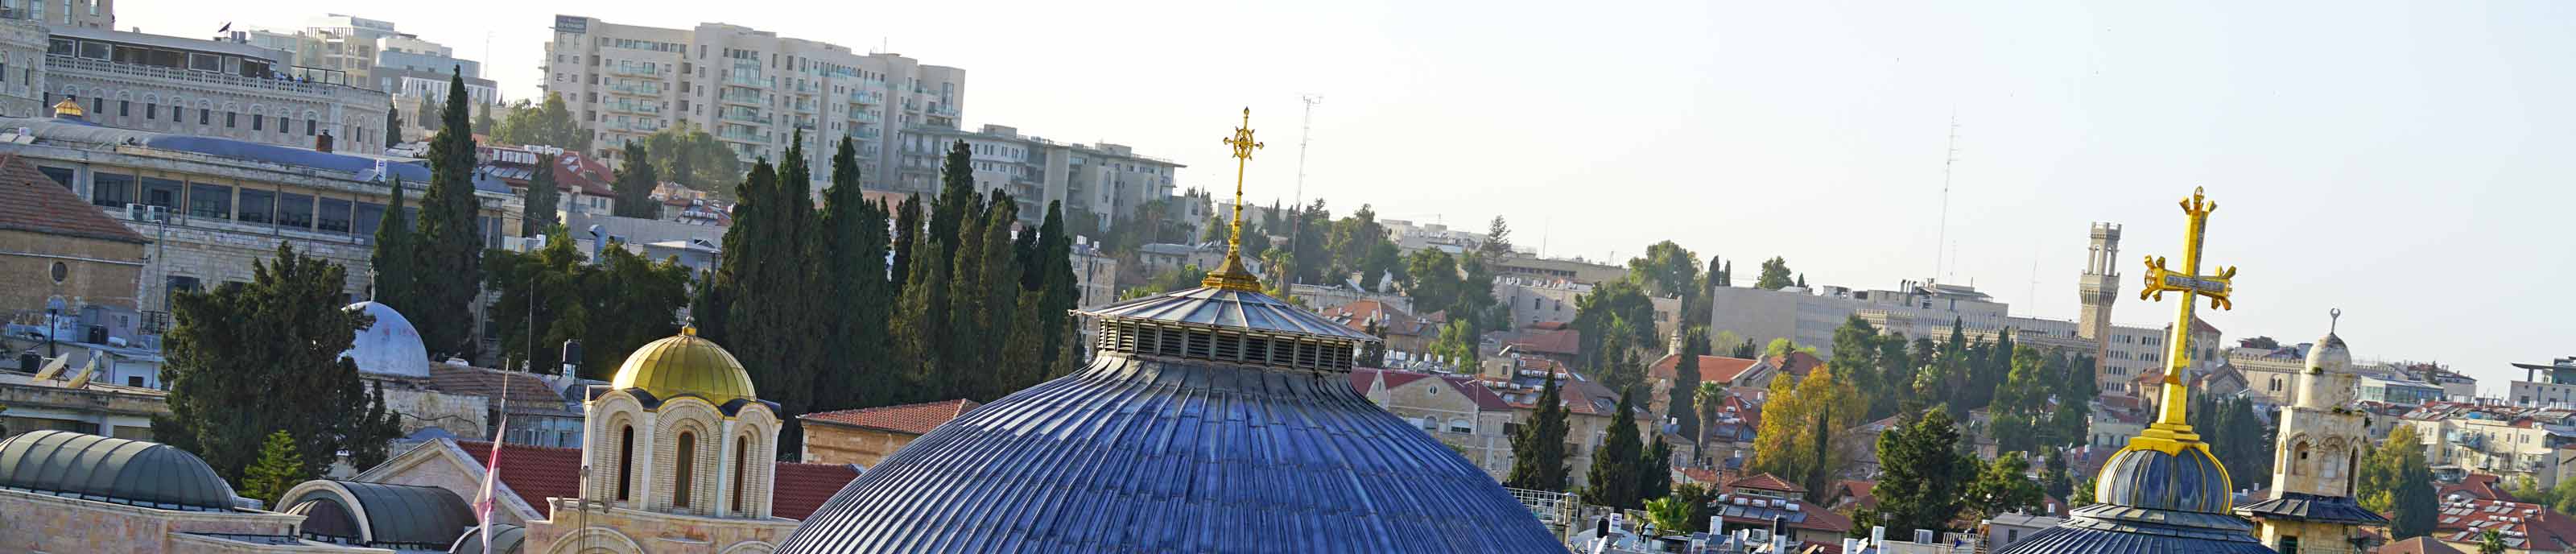 Dome of the Holy Sepulchre in Jerusalem